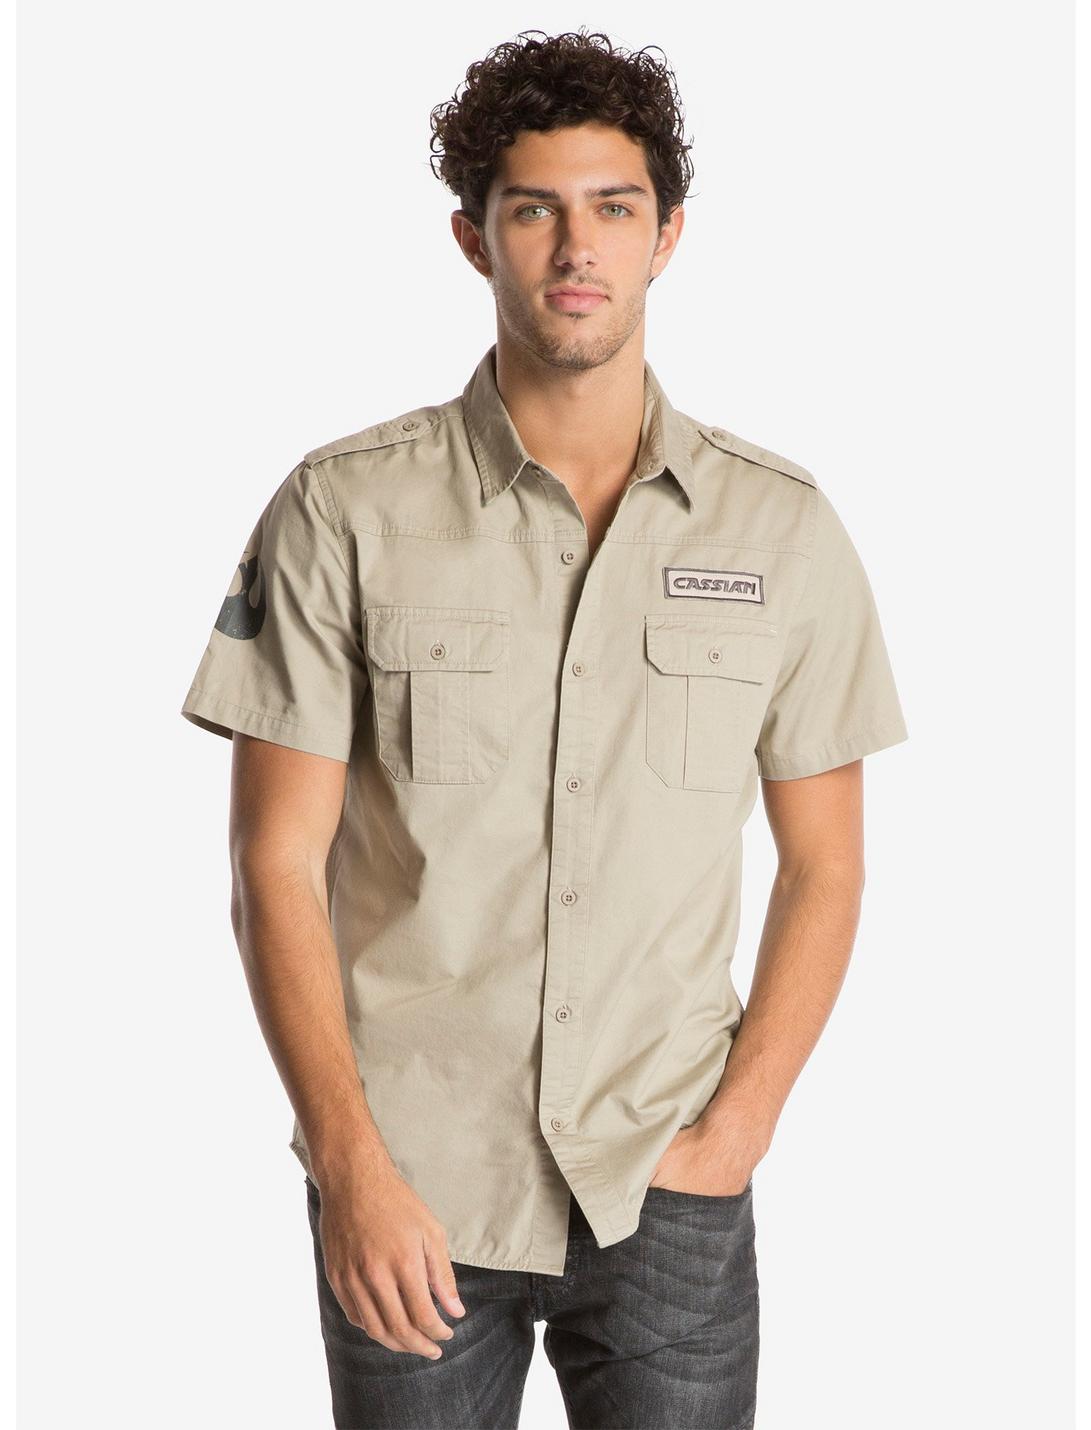 Star Wars Rogue One Cassian Short-Sleeved Woven Button-Up, TAN/BEIGE, hi-res